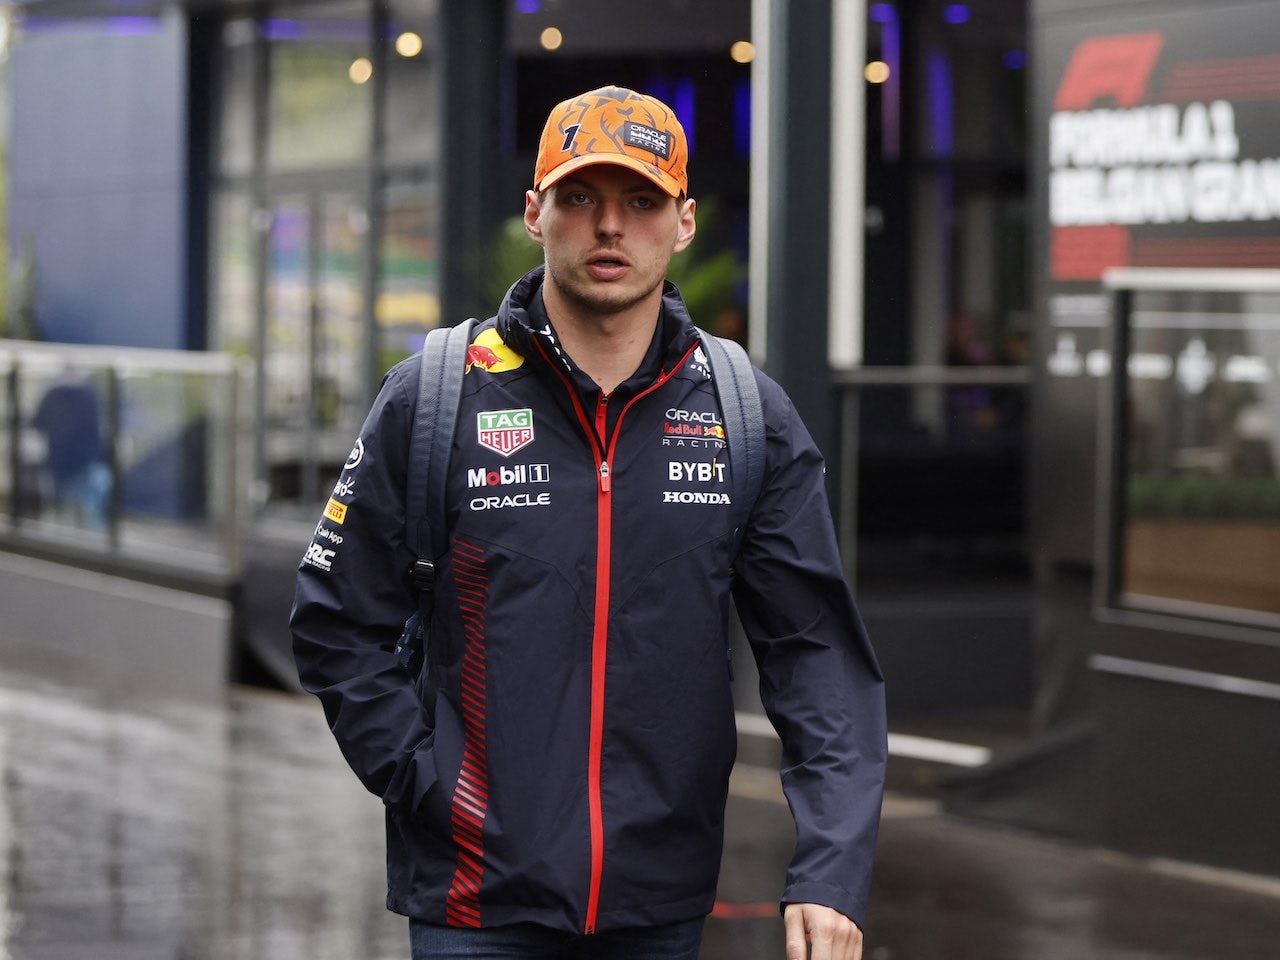 Spa could be 'easiest win' of 2023 for Verstappen